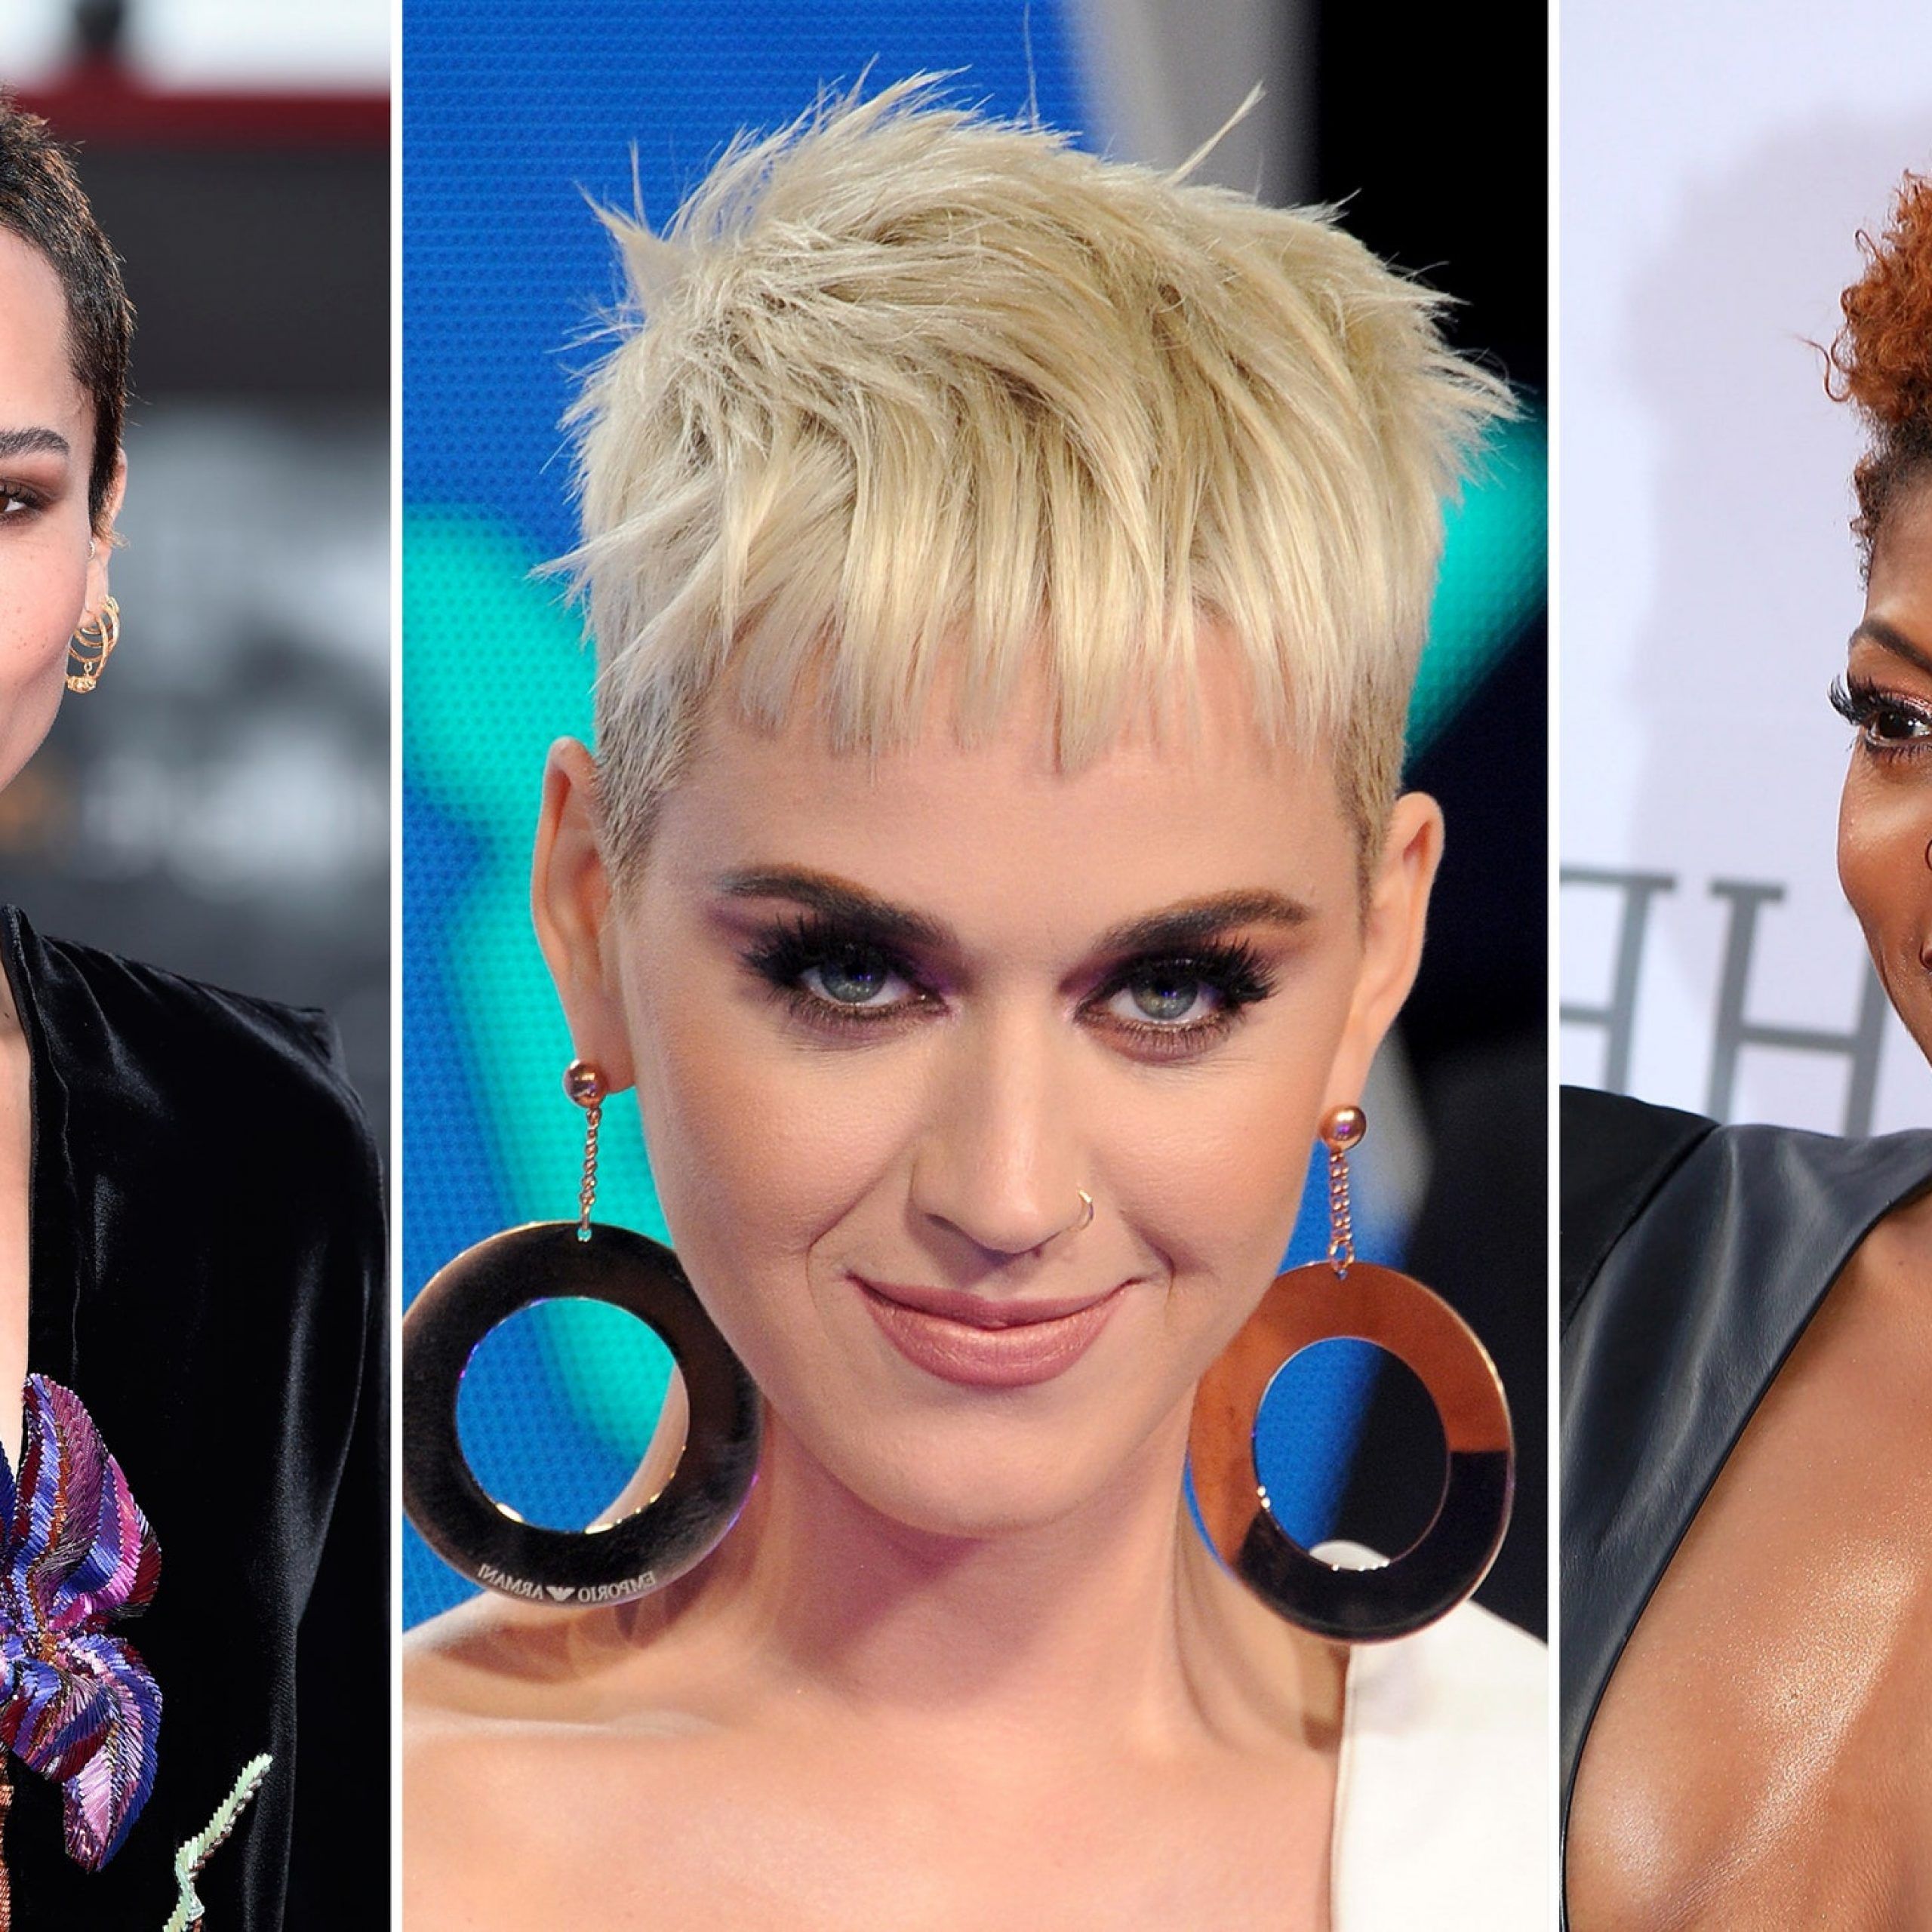 19 Best Pixie Cuts Of 2019 – Celebrity Pixie Hairstyle Ideas | Allure With Funky Disheveled Pixie Hairstyles (View 13 of 20)